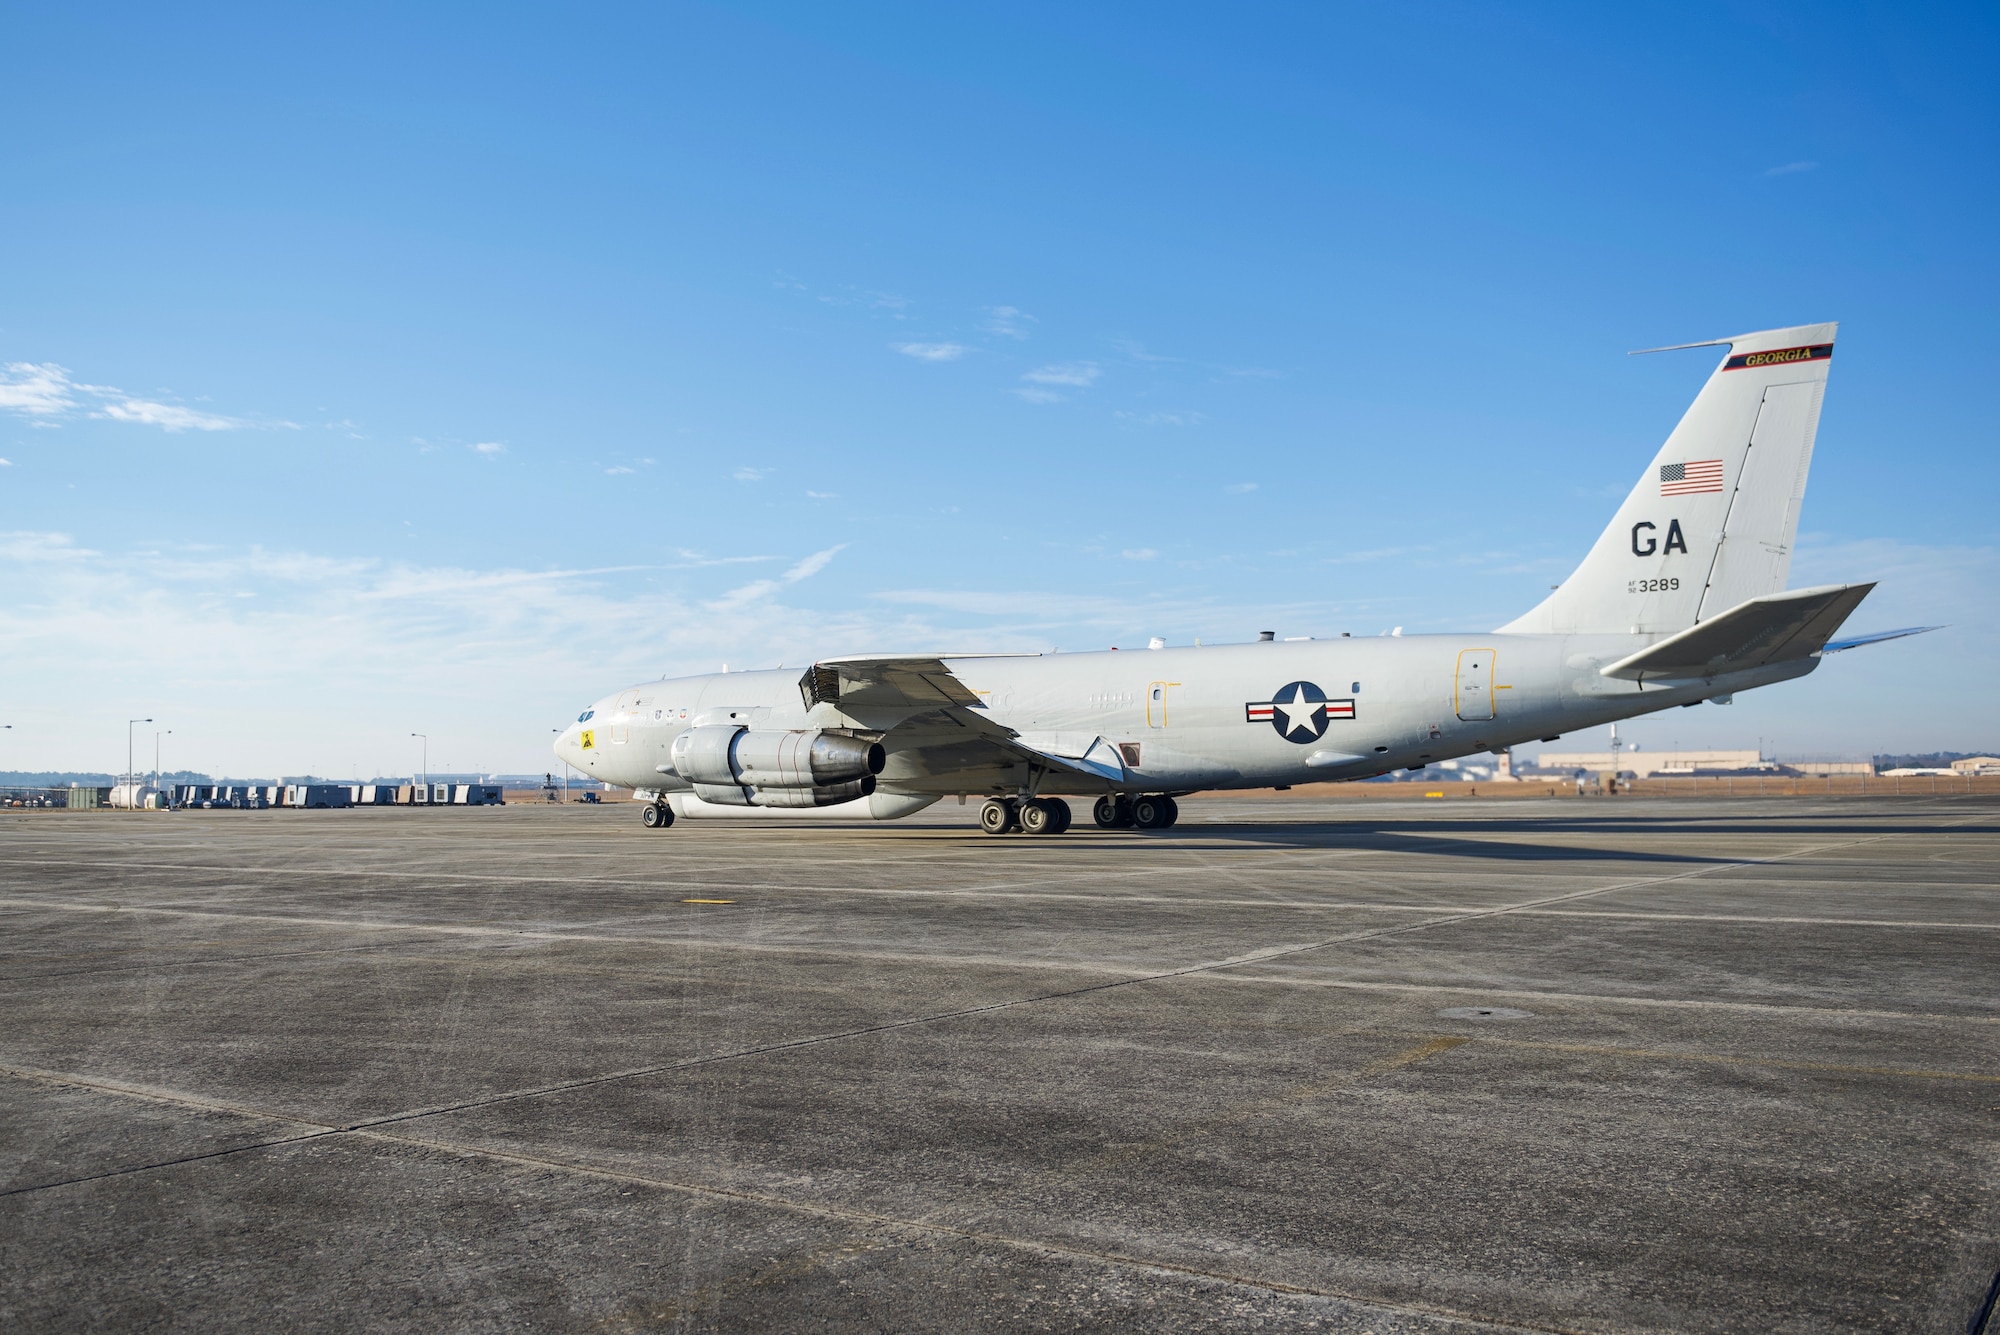 An E-8C Joint STARS aircraft taxis on the ramp prior to its final departure at Robins Air Force Base, Georgia, Feb. 11, 2022. 
The aircraft has been in military service since 1996 and will retire to its final resting place withe the 309th Maintenance Regeneration Group at Davis-Monthan Air Force Base, Arizona. (U.S. Air National Guard photo by Tech. Sgt. Michelle Self)